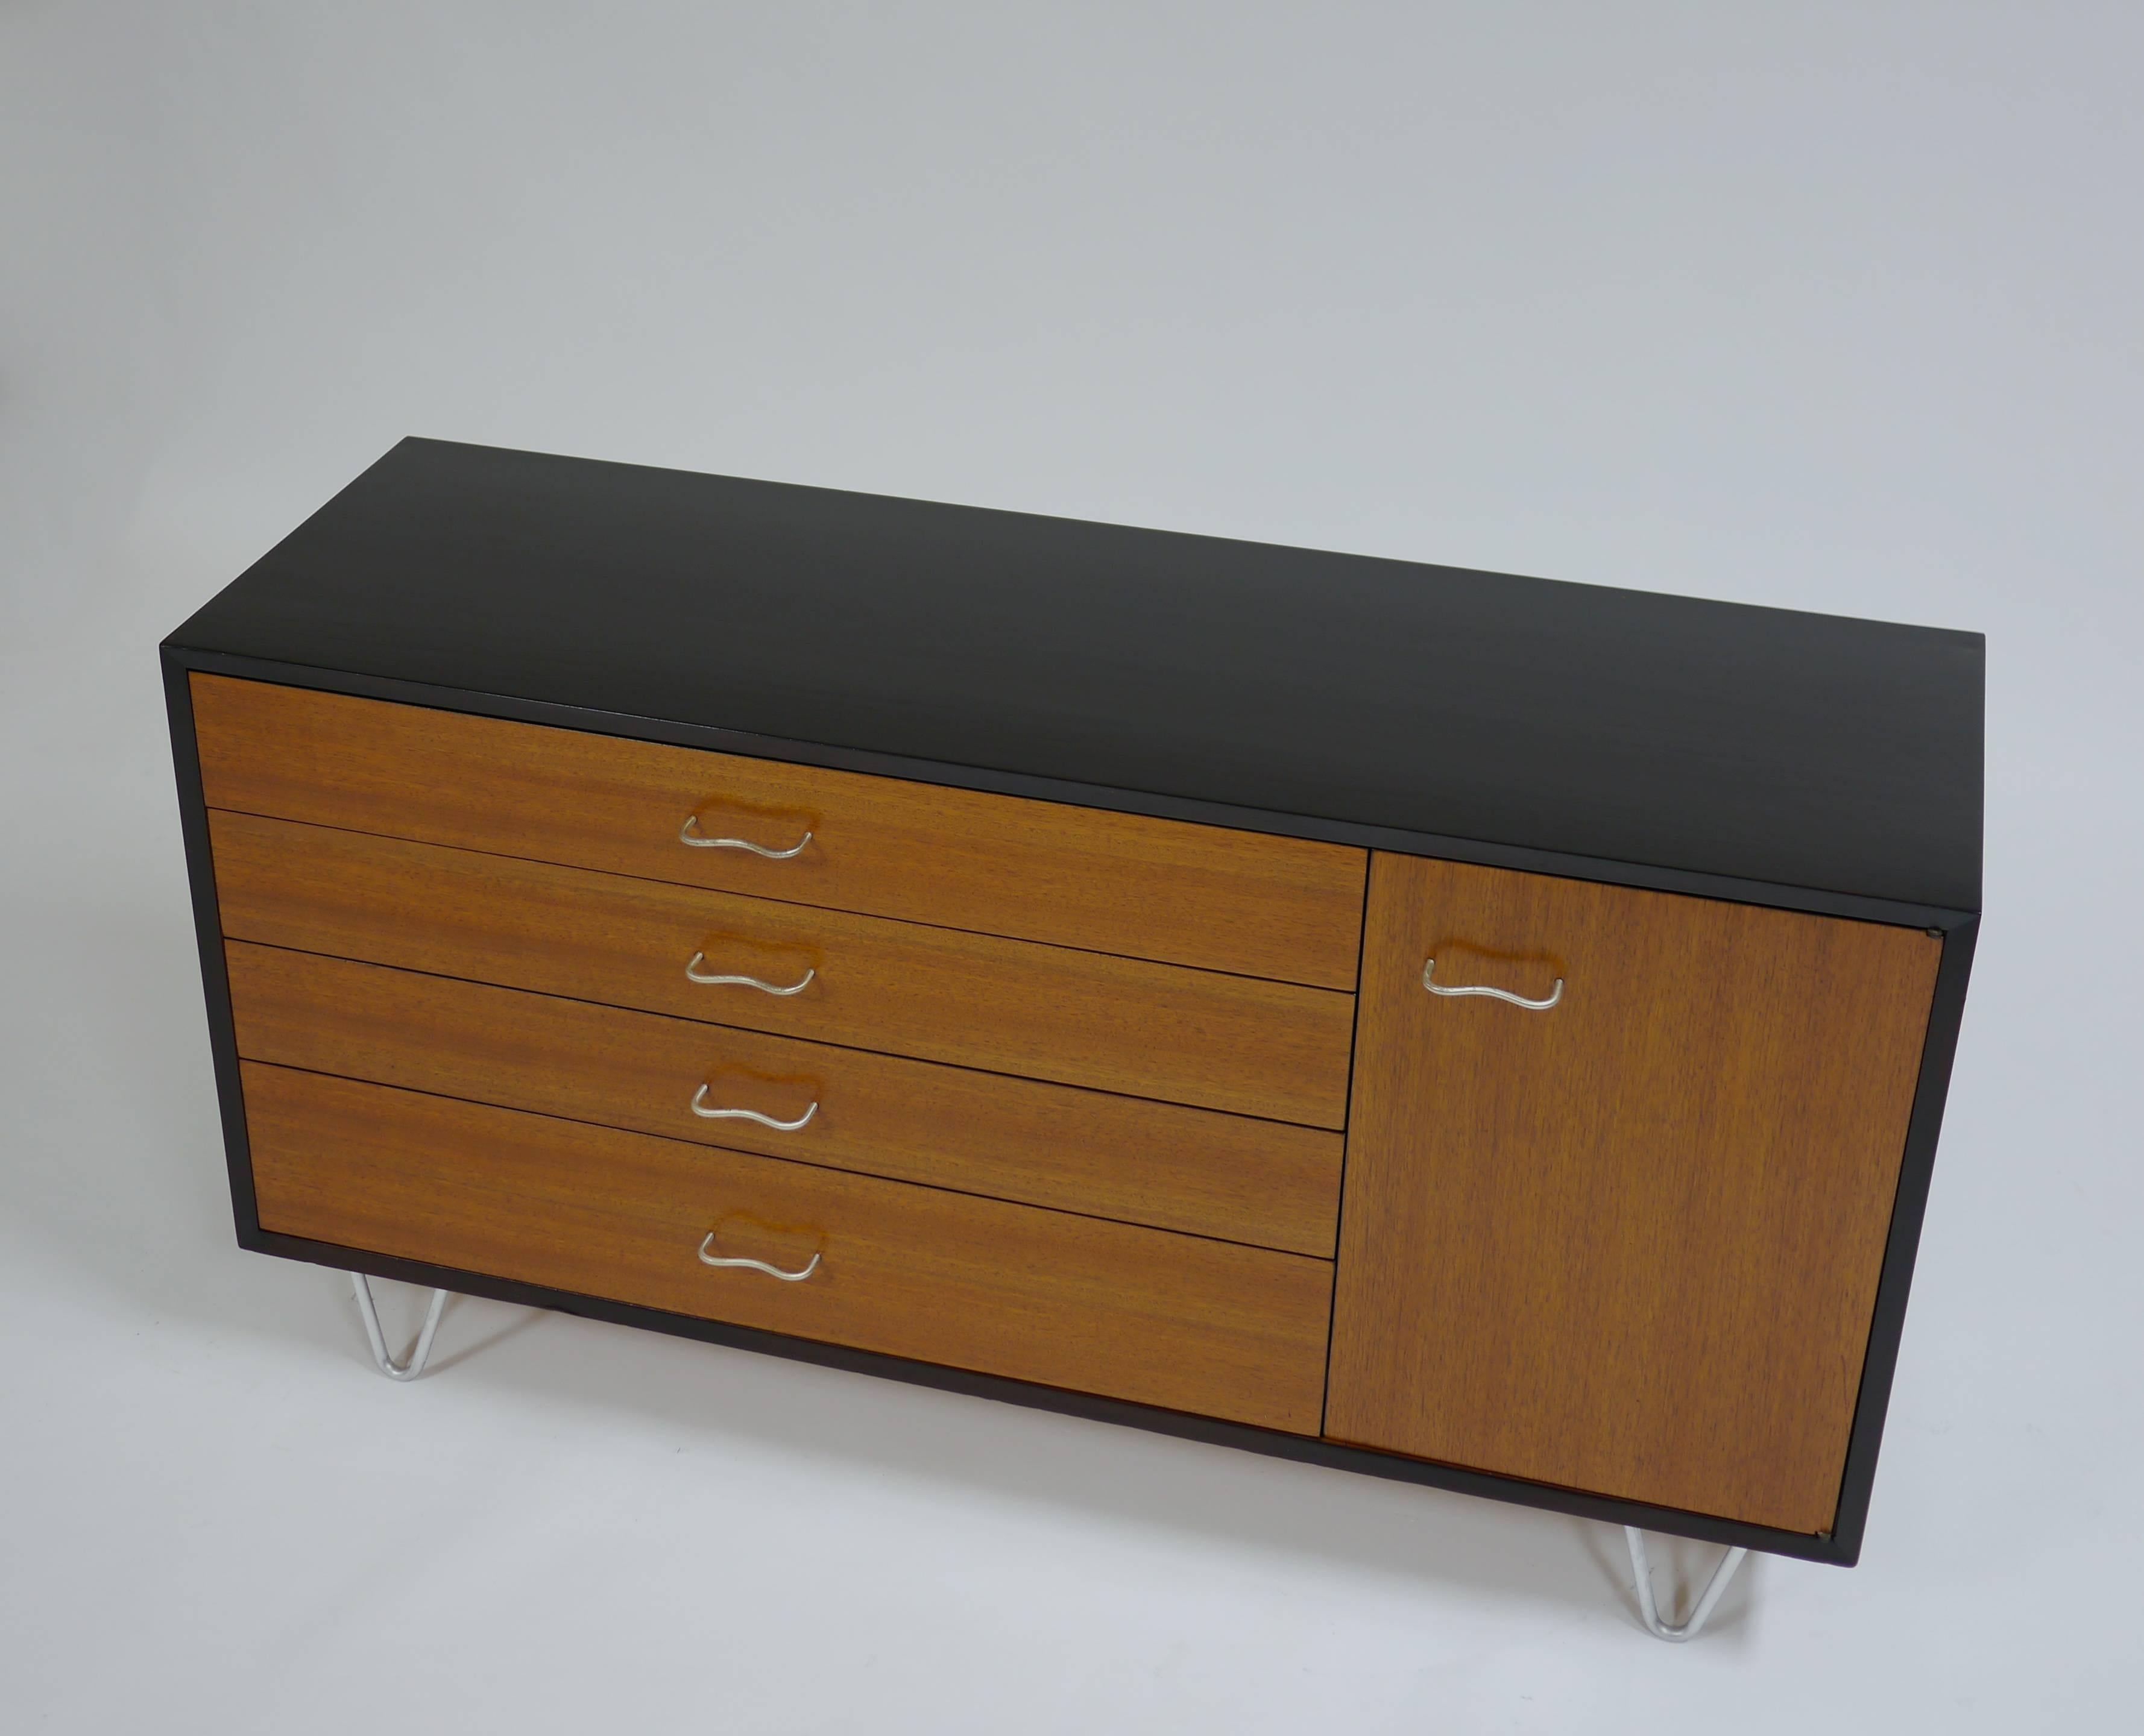 Dresser on hairpin legs by George Nelson for Herman Miller. Having four drawers, one cabinet with an adjustable shelf.